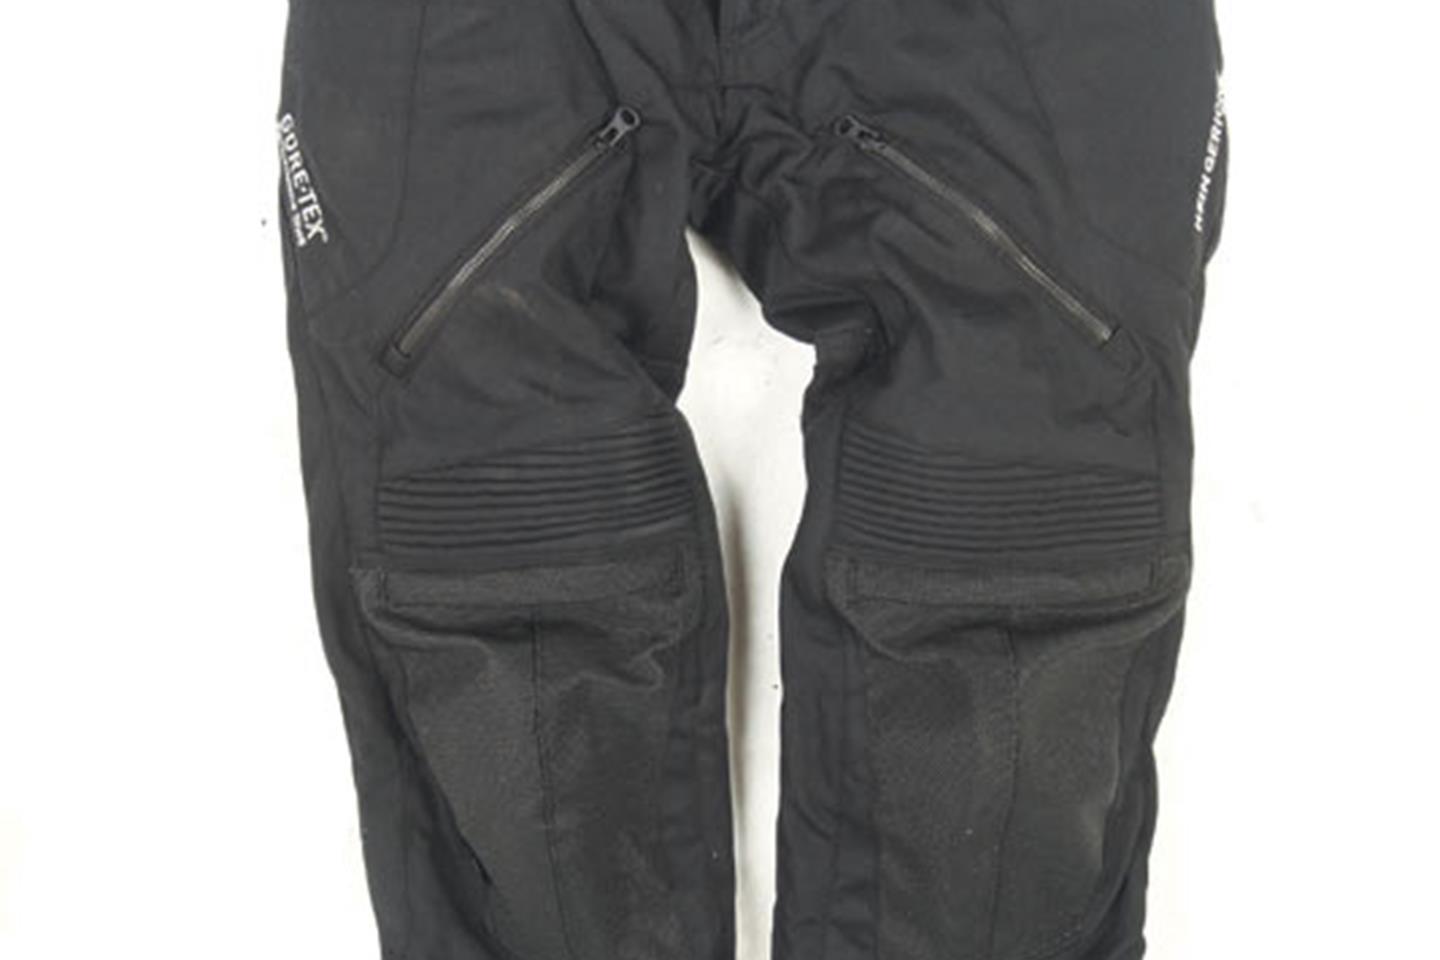 Product review: Hein Gericke Tricky IV jacket & trousers | MCN